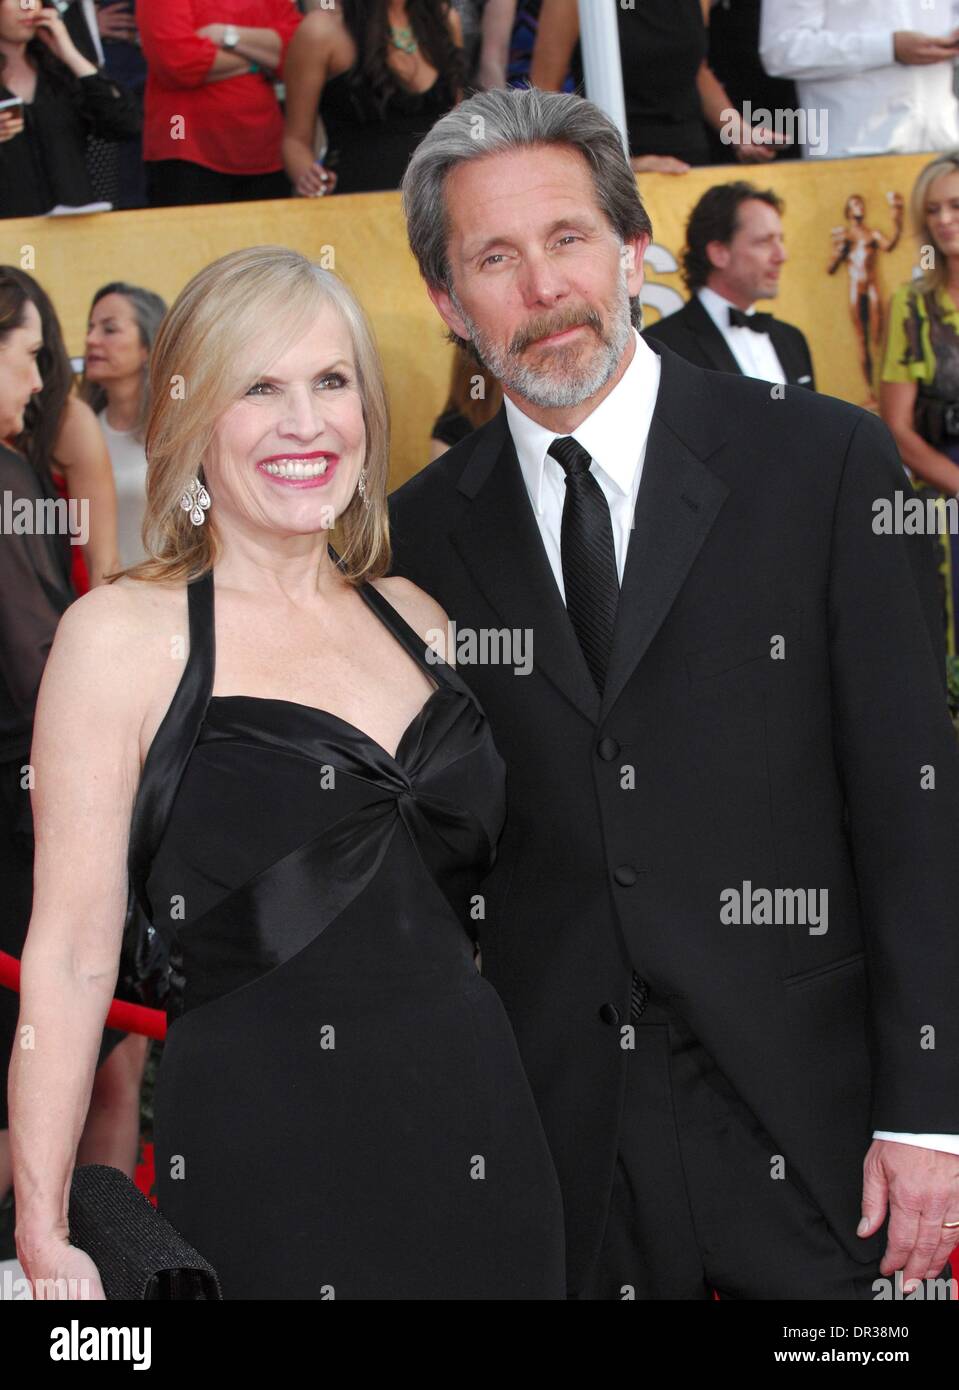 Los Angeles, CA, USA. 18th Jan, 2014. Teddi Siddall, Gary Cole at arrivals for The 20th Annual Screen Actors Guild Awards (SAGs) - ARRIVALS 1, The Shrine Auditorium, Los Angeles, CA January 18, 2014. Credit:  Elizabeth Goodenough/Everett Collection/Alamy Live News Stock Photo